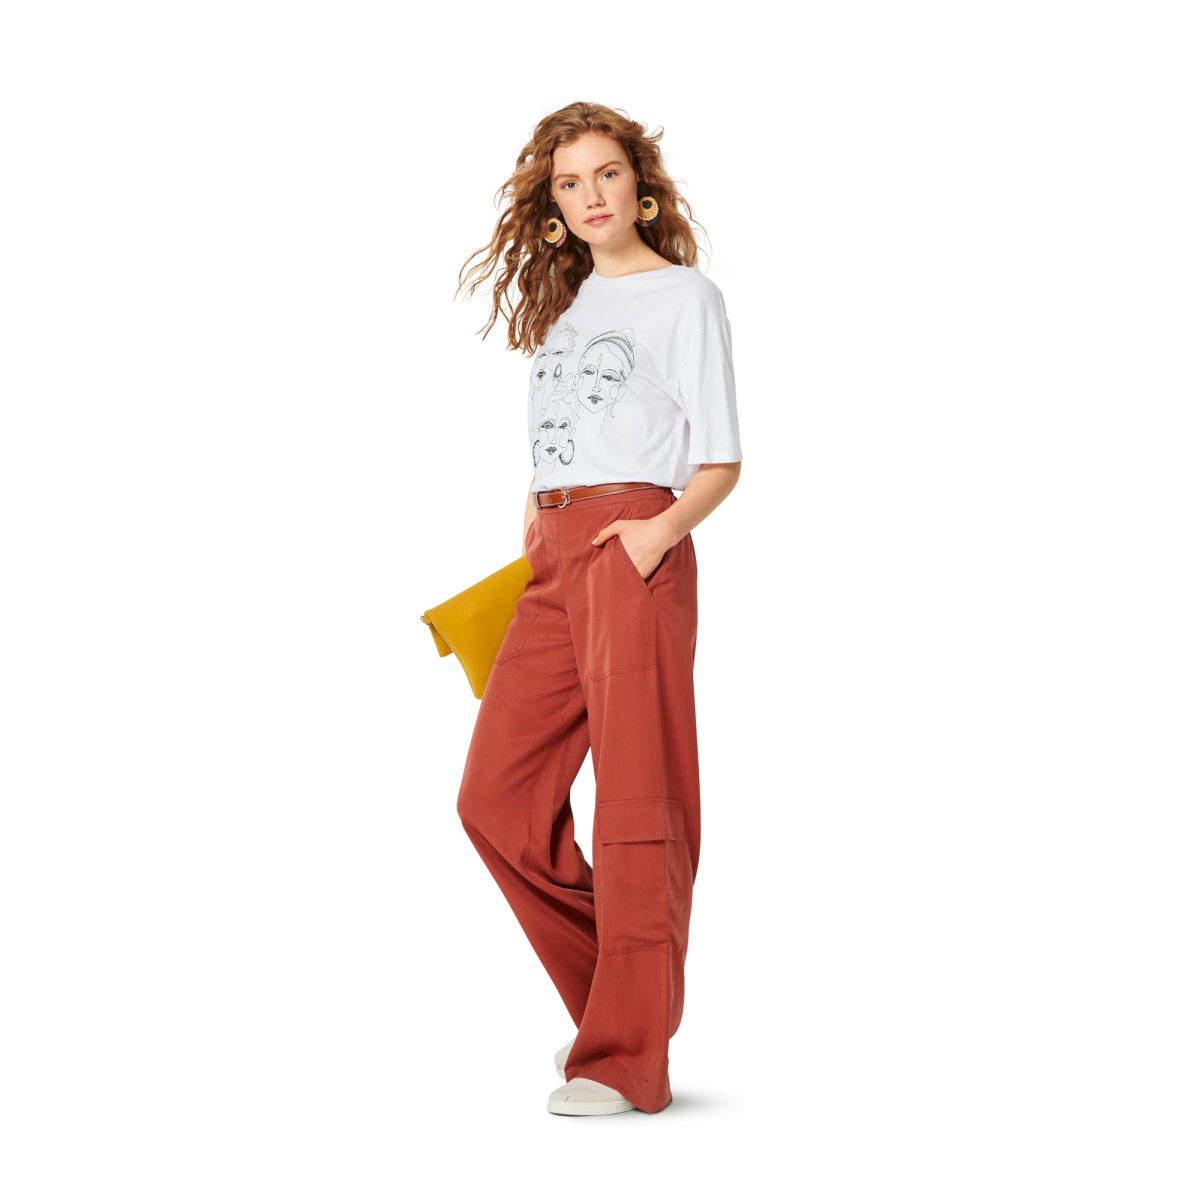 Burda Pattern 6229 Trousers/Pants with Elastic Waist with Pockets in S —   - Sewing Supplies